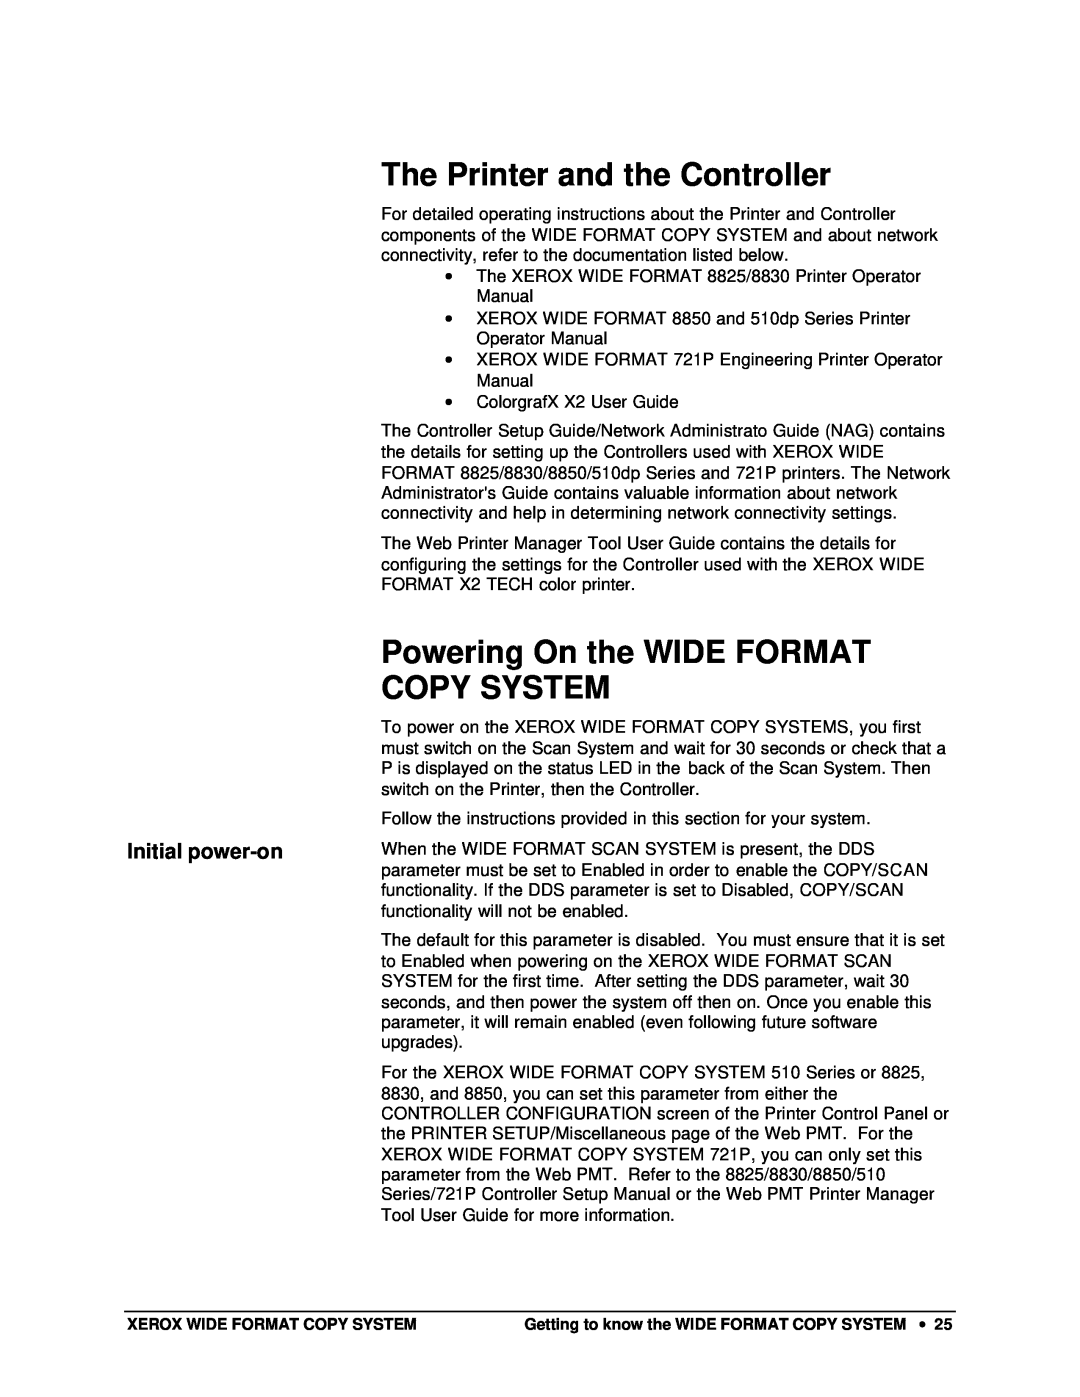 Xerox X2, 8825, 8850, 8830 manual The Printer and the Controller, Powering On the WIDE FORMAT COPY SYSTEM, Initial power-on 